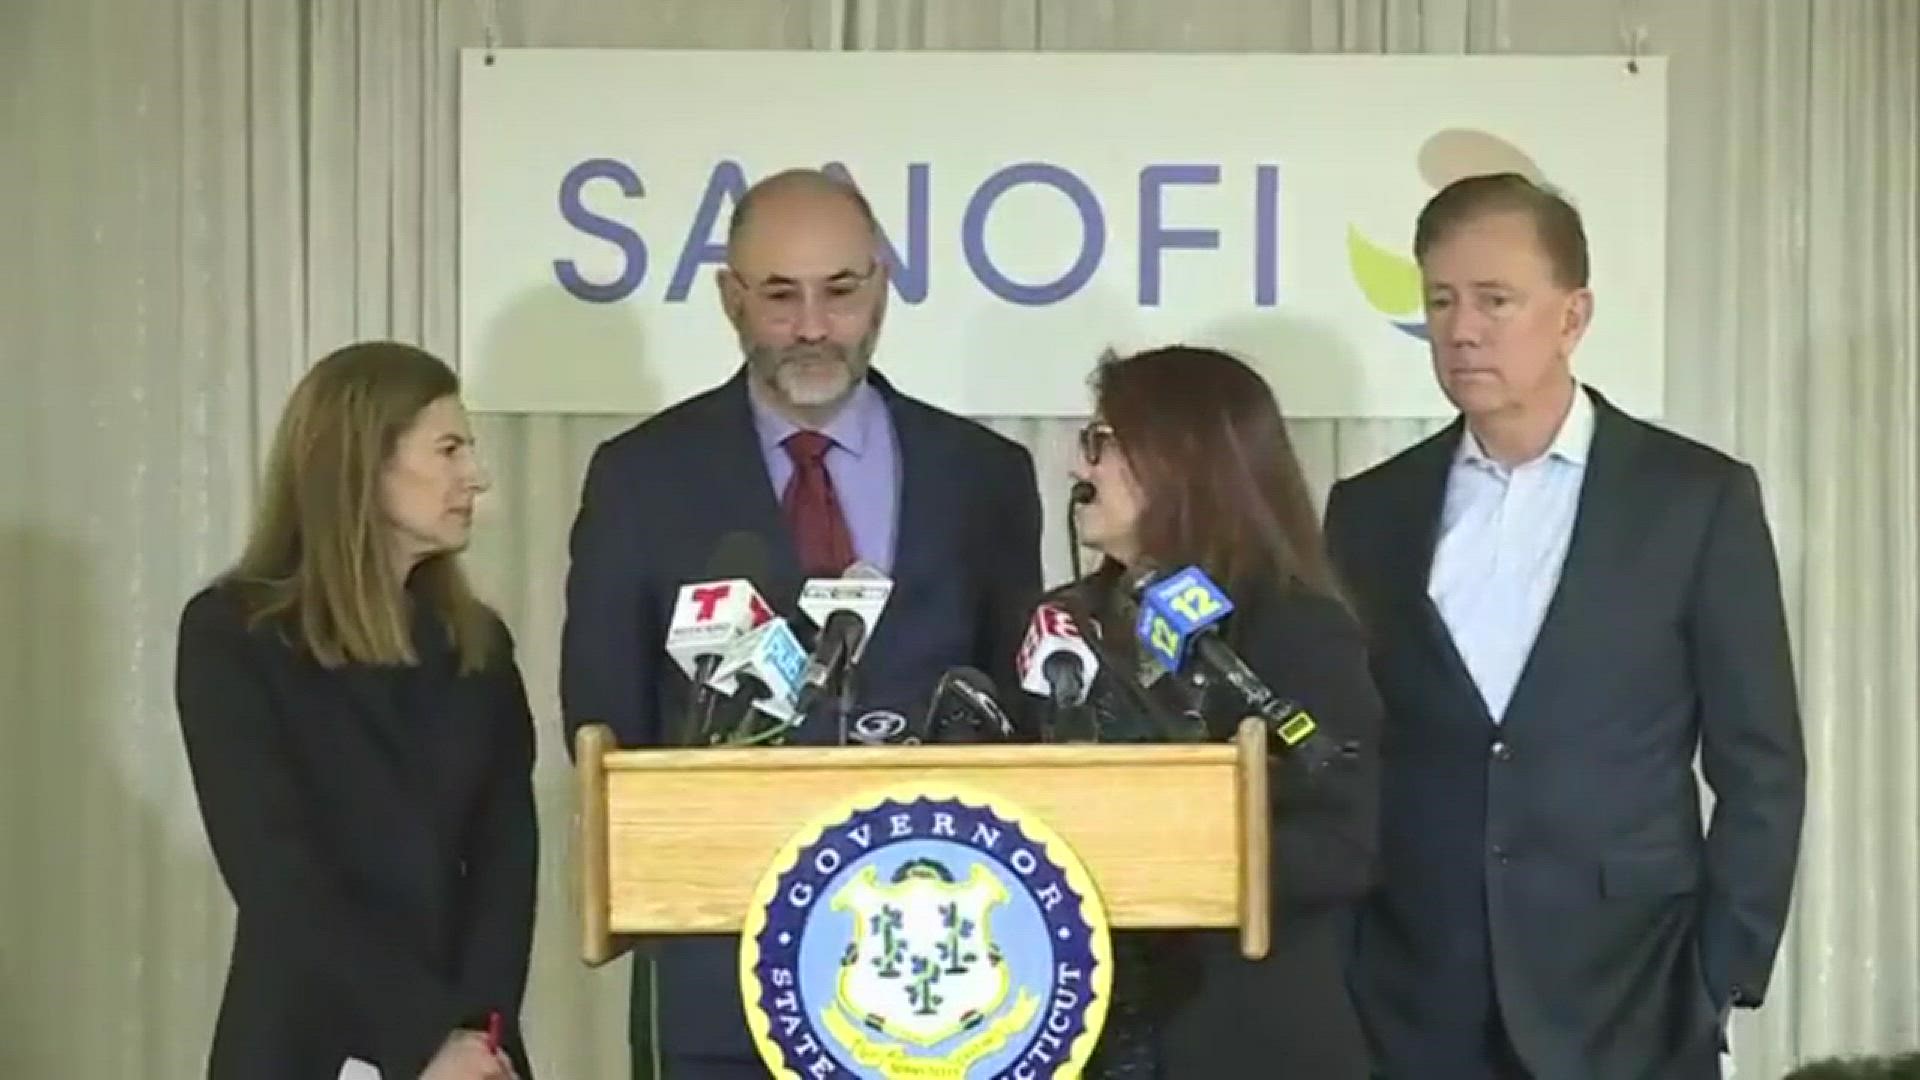 A fourth person has been confirmed to have coronavirus in Connecticut. Governor Ned Lamont said the case is in Stamford.